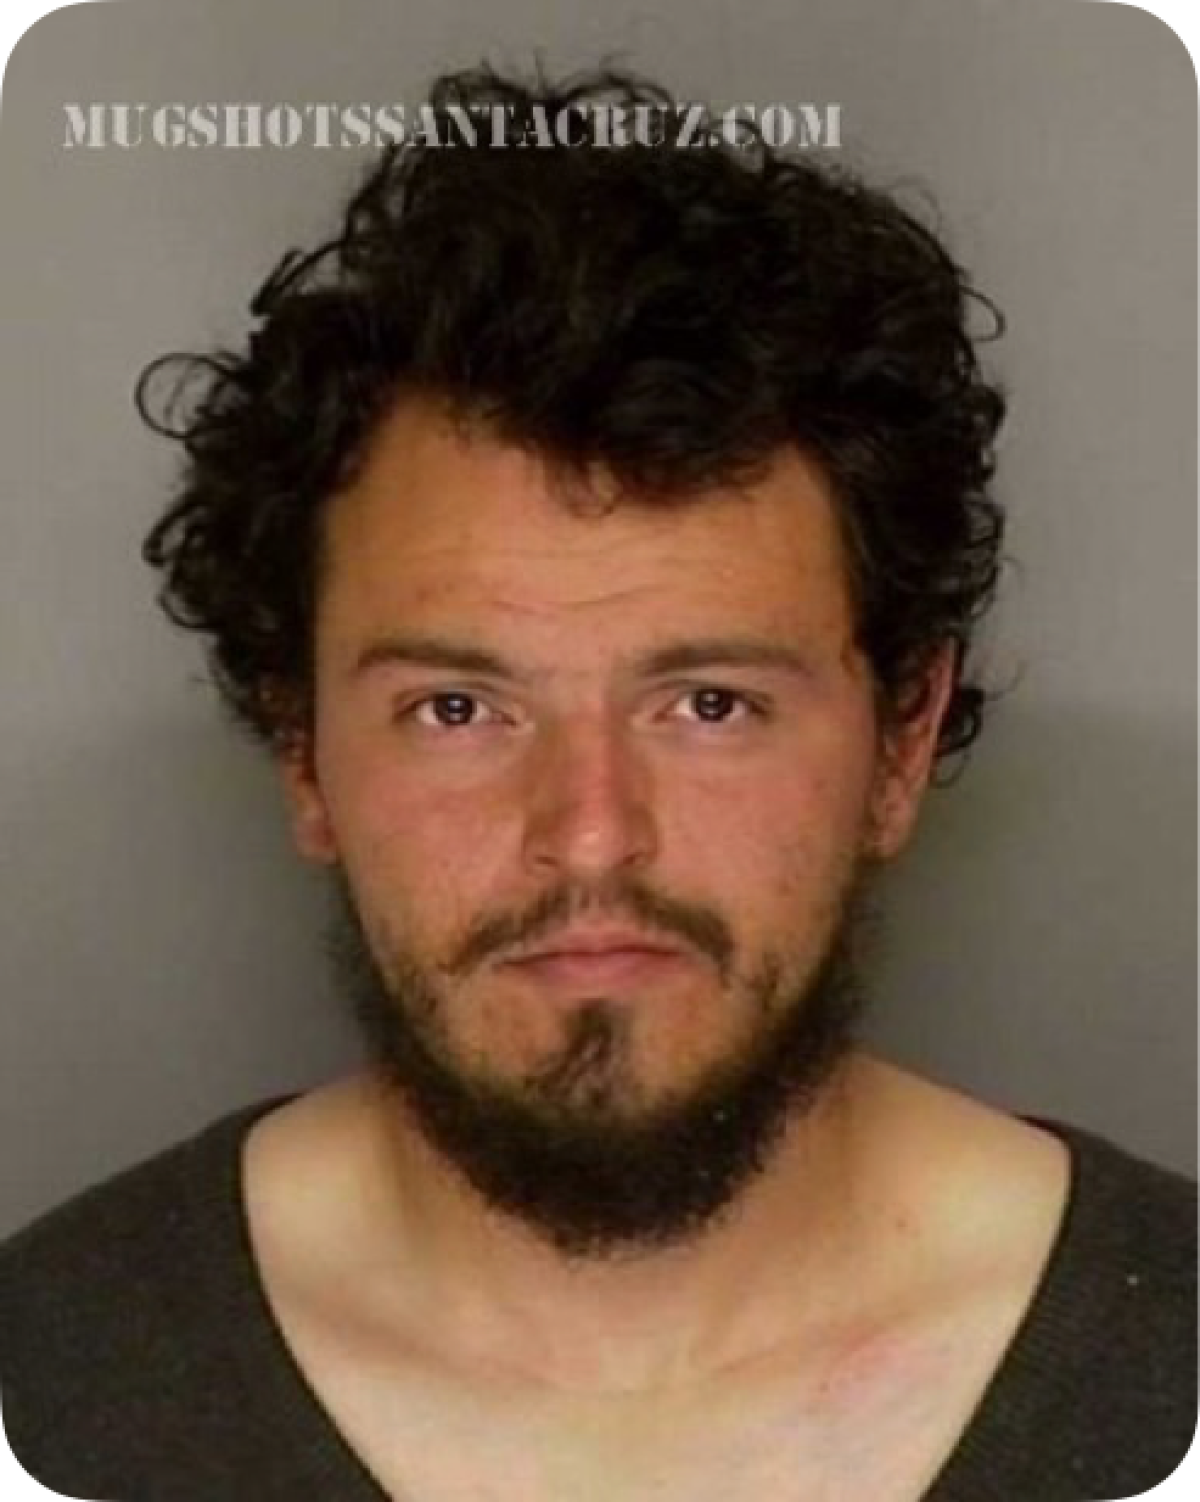 Mason James Lira is suspected in the shooting of a sheriff's deputy and killing of a local man in Paso Robles.